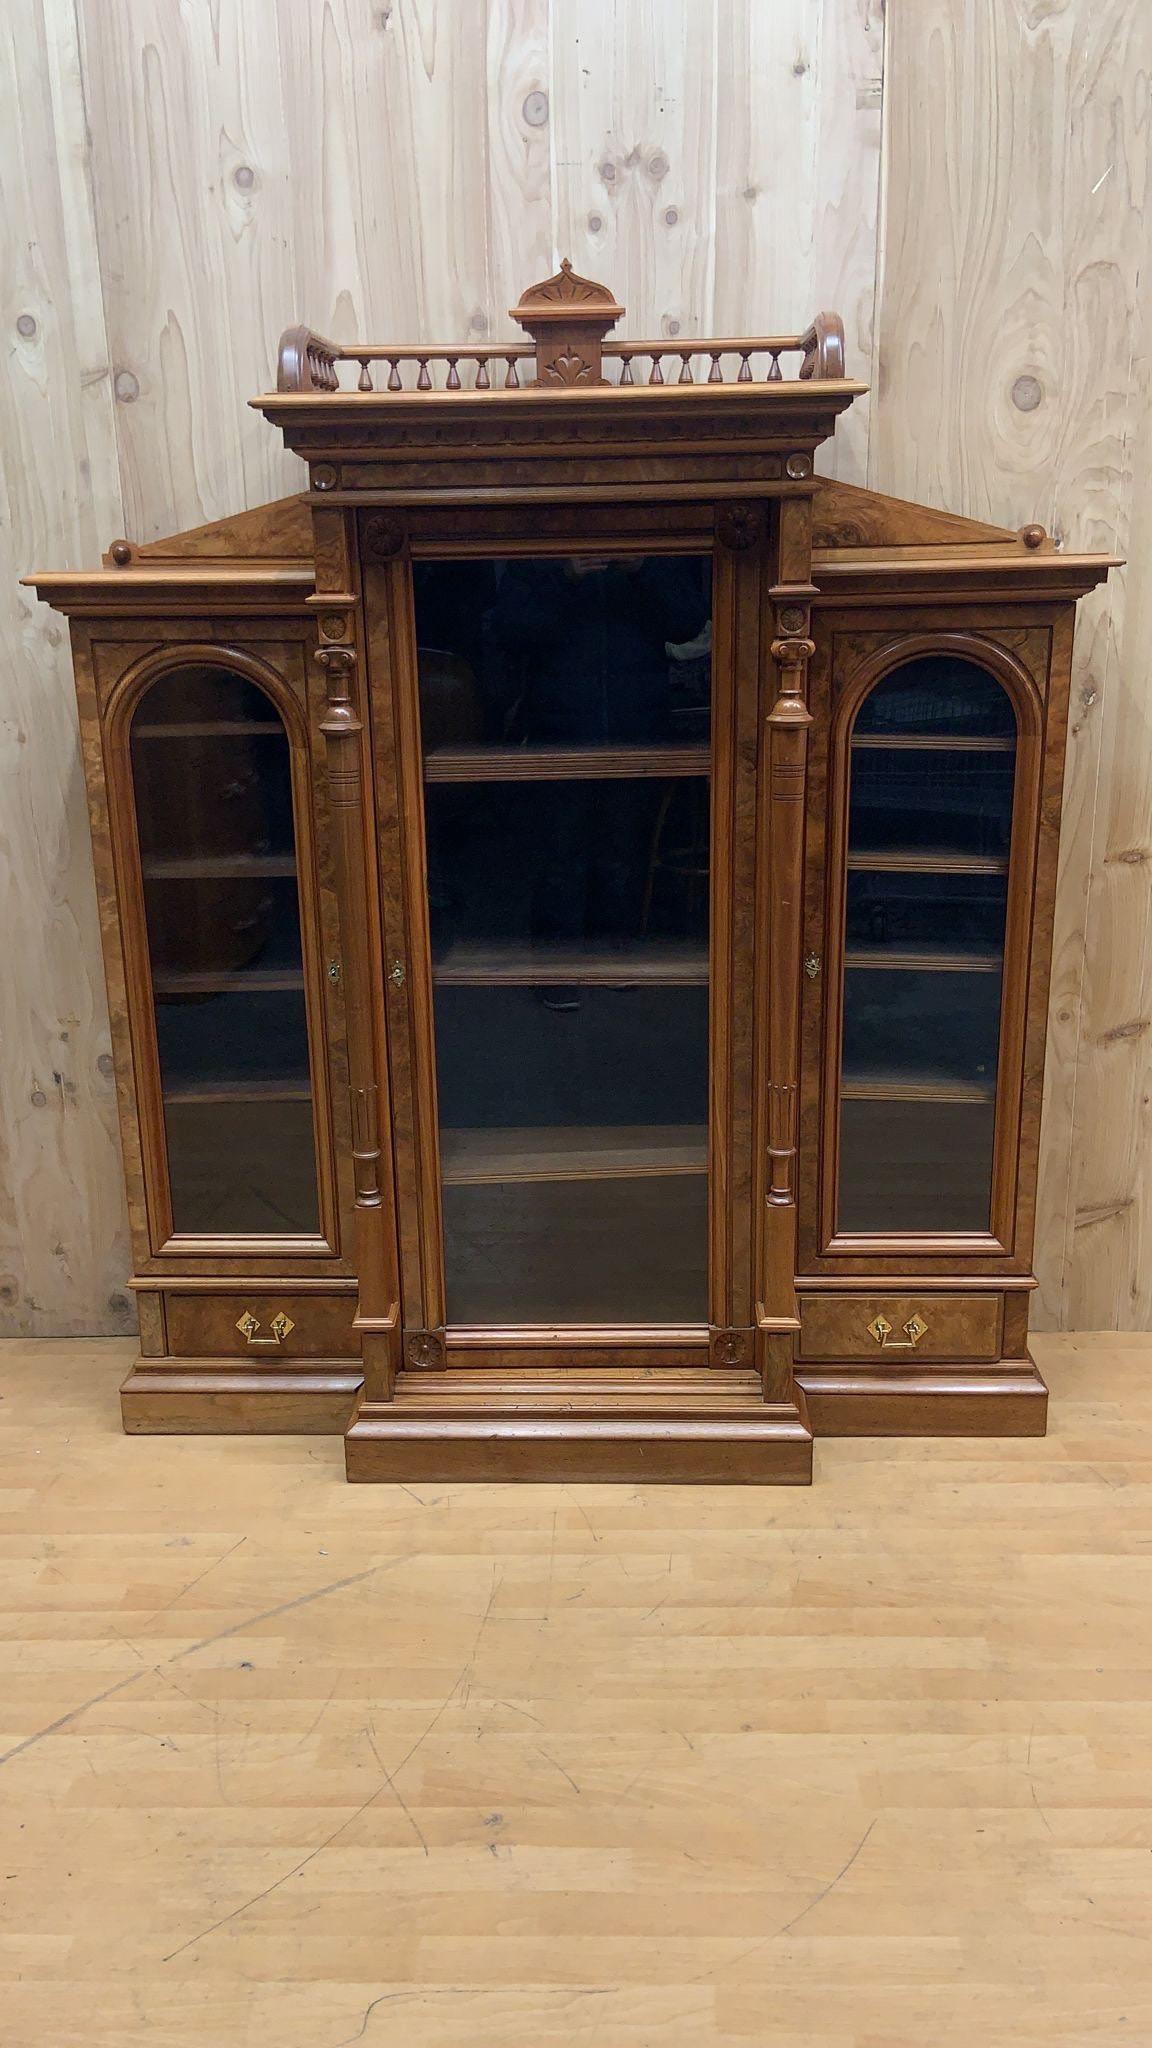 Antique Victorian Eastlake Walnut Bookcase Display Case

Gorgeous Eastlake Victorian walnut display case/bookcase is just a gorgeous piece of antique furniture. It is in extremely good condition for its age. The warm walnut wood and hand-built